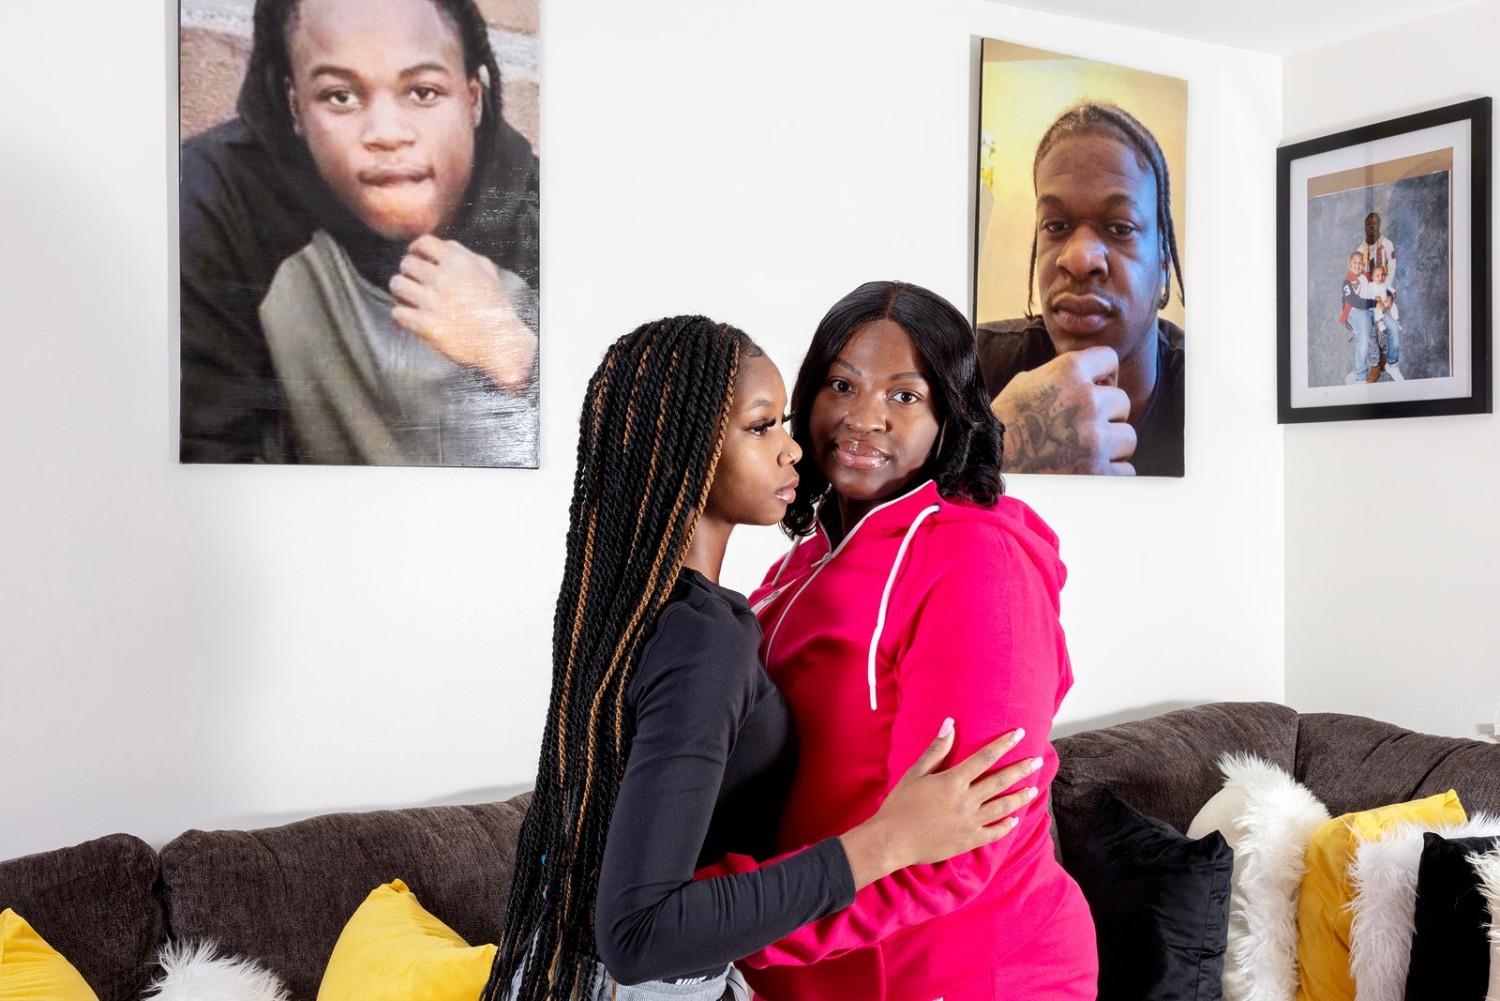 Laquvia Jones, photographed with her daughter.Photographs by Luis Manuel Diaz for The New Yorker